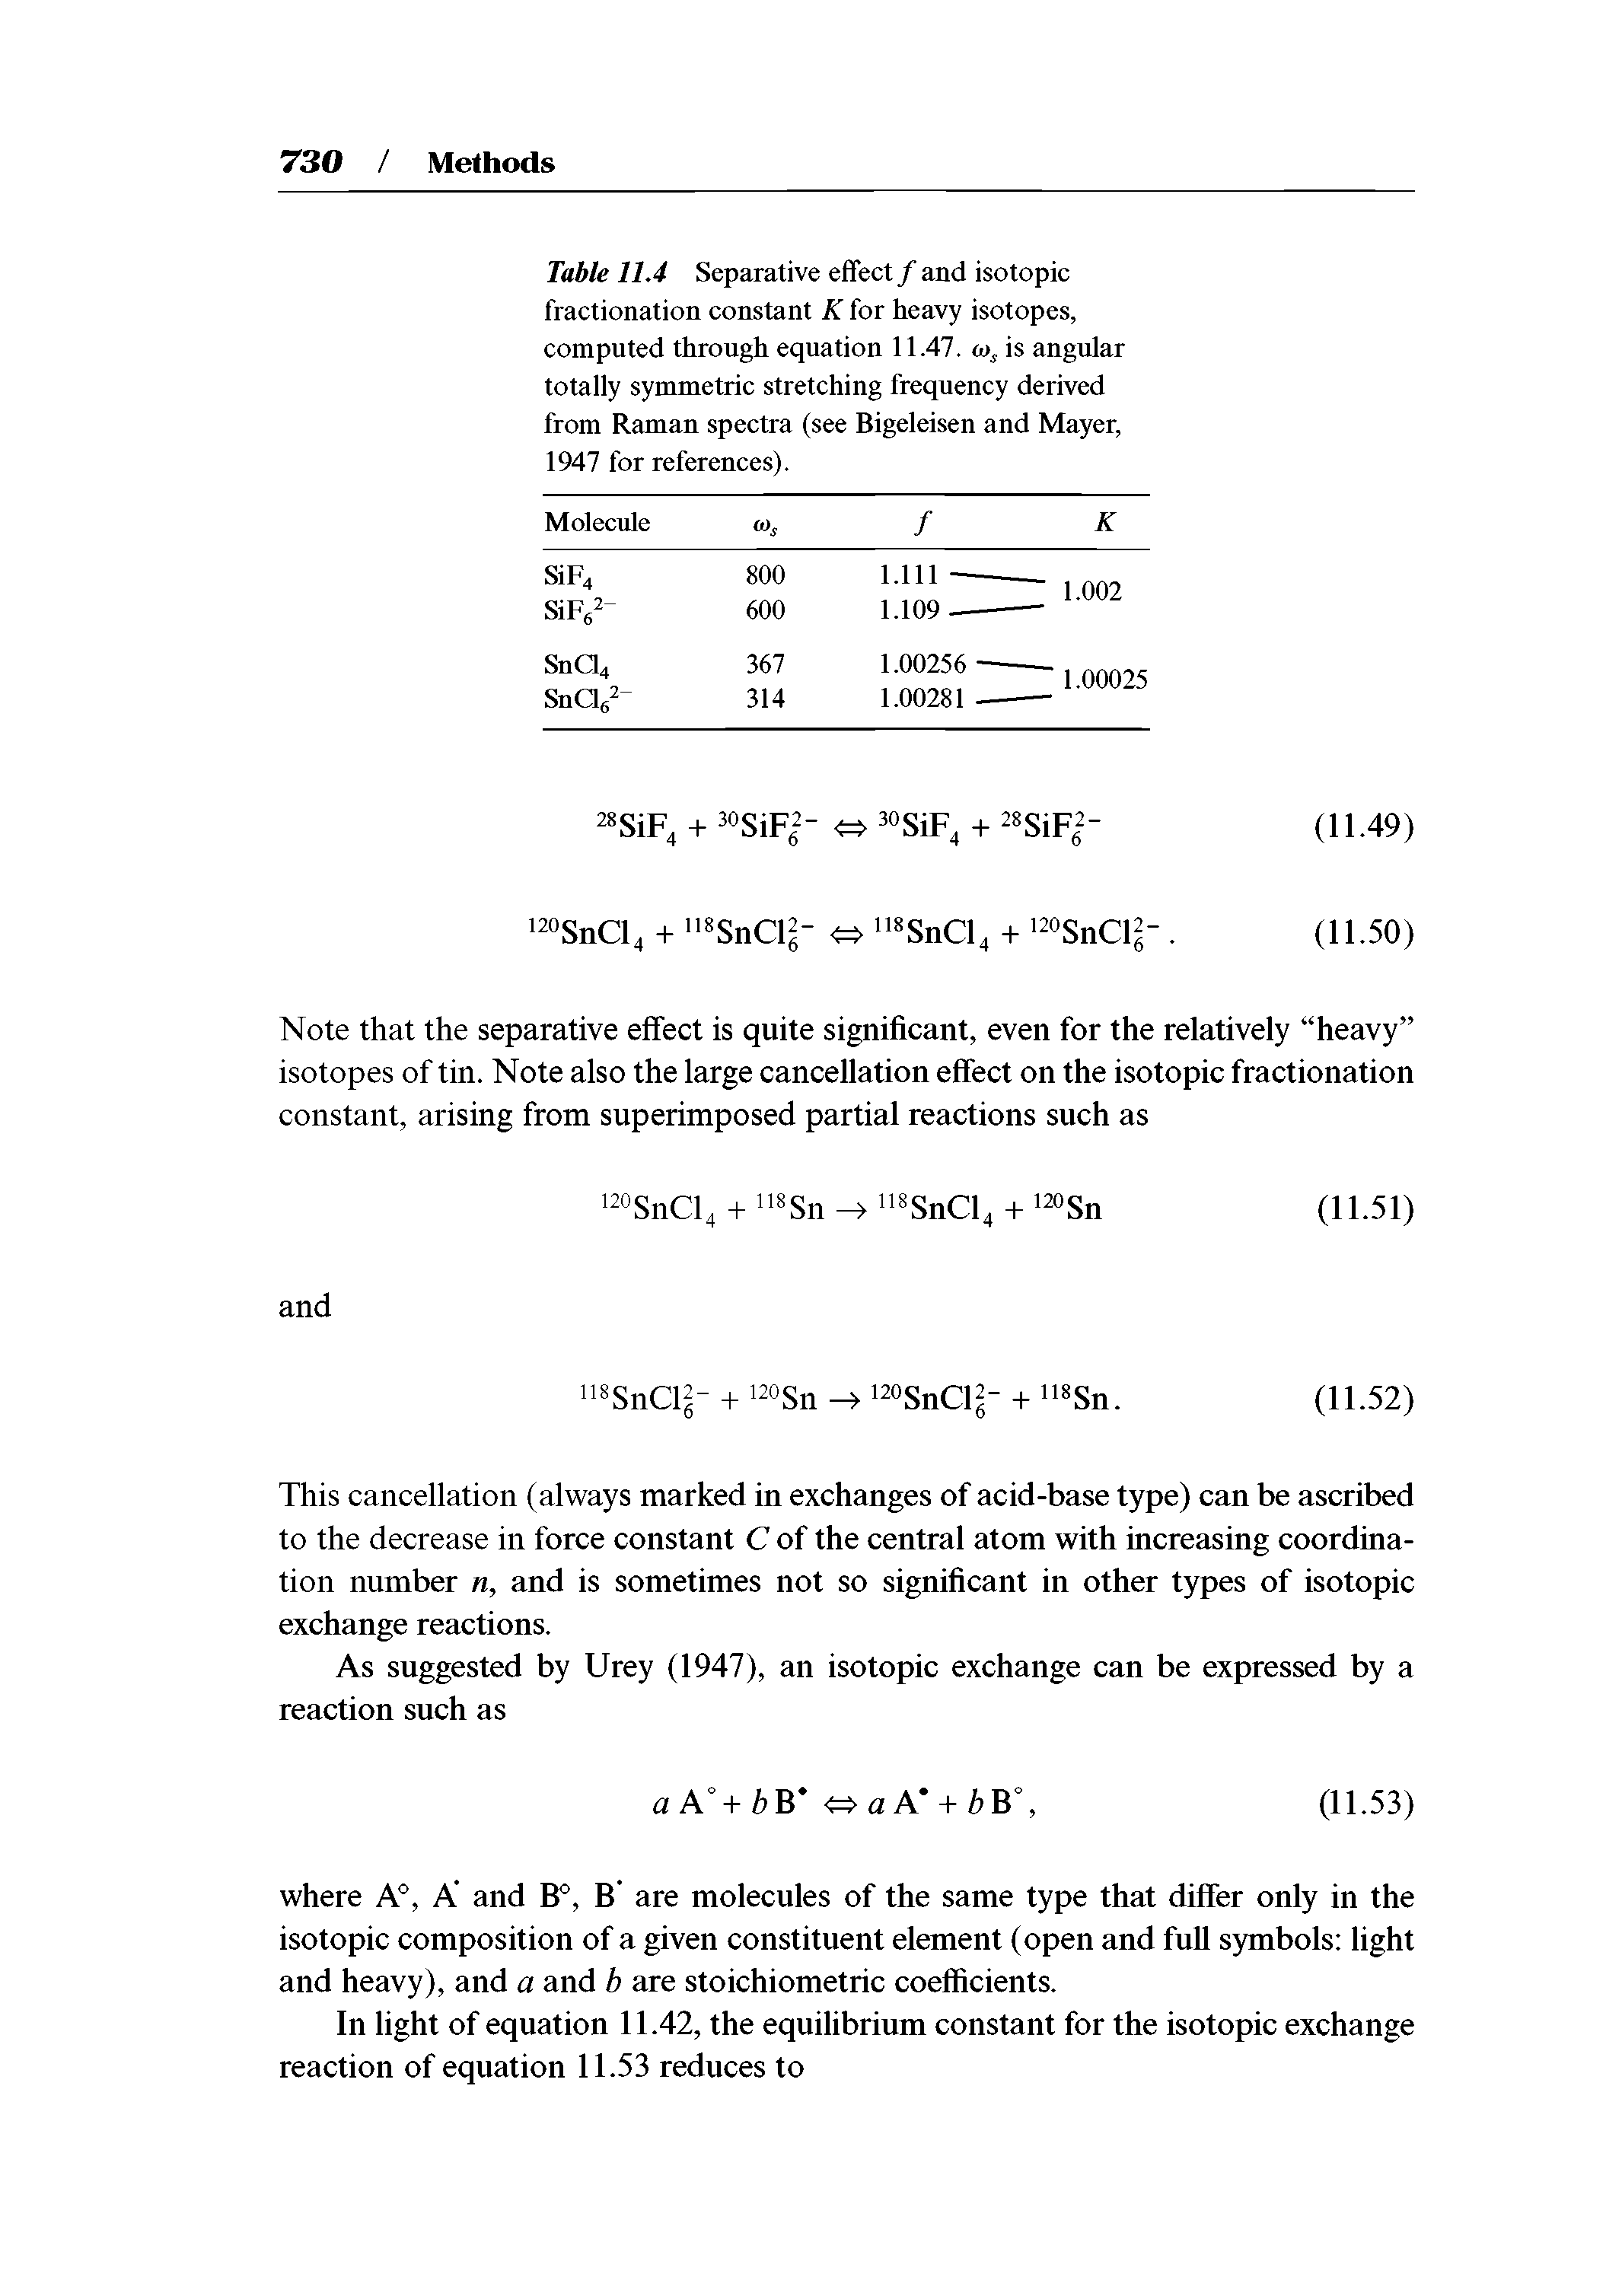 Table 11.4 Separative effect / and isotopic fractionation constant K for heavy isotopes, computed through equation 11.47. is angular totally symmetric stretching frequency derived from Raman spectra (see Bigeleisen and Mayer, 1947 for references).